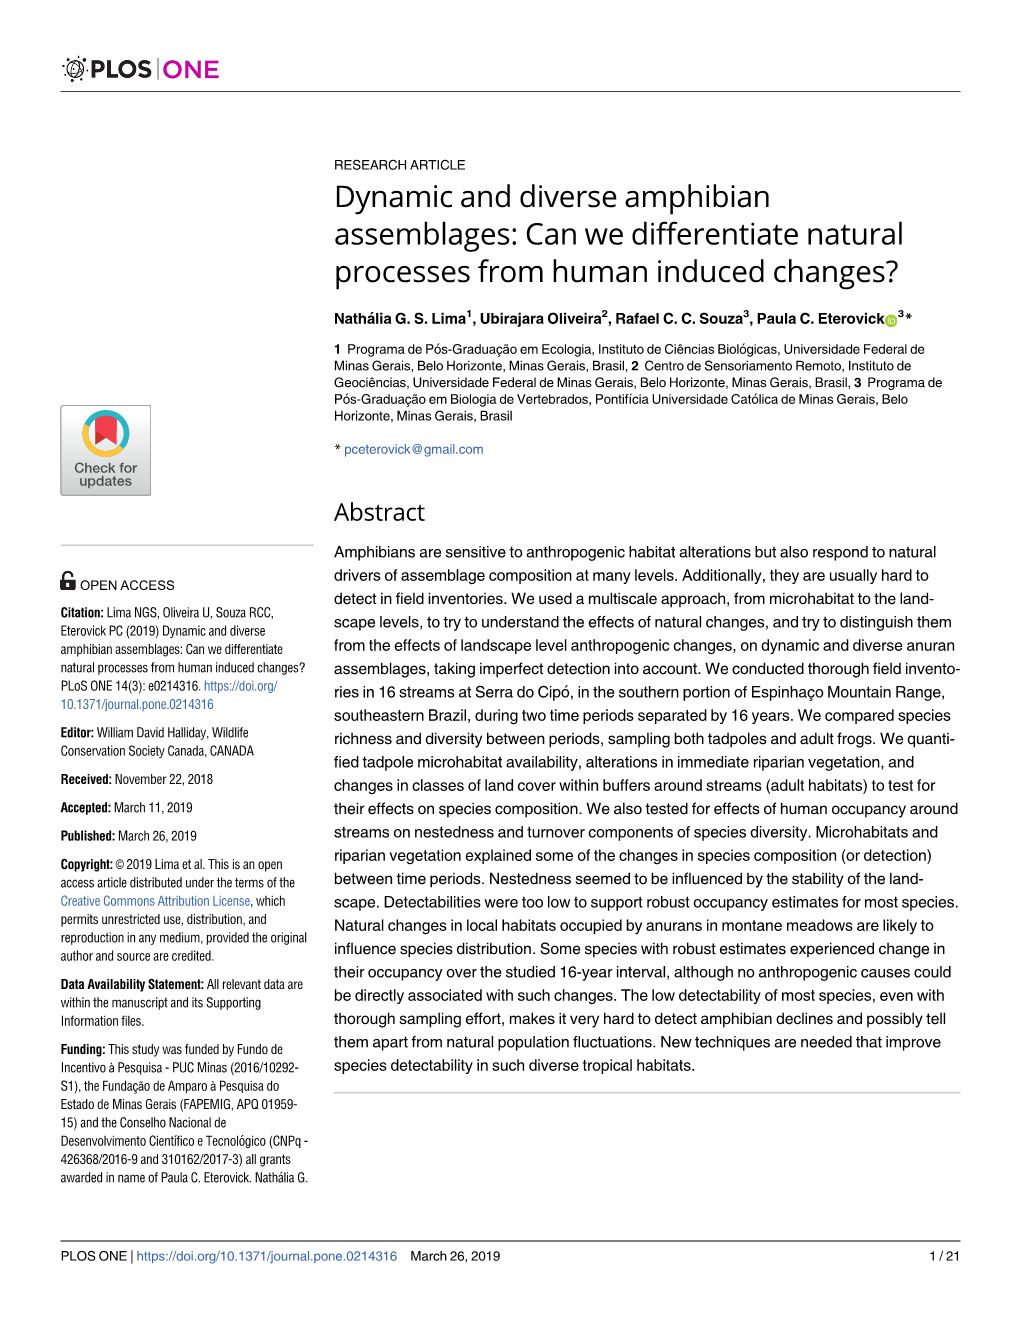 Dynamic and Diverse Amphibian Assemblages: Can We Differentiate Natural Processes from Human Induced Changes?